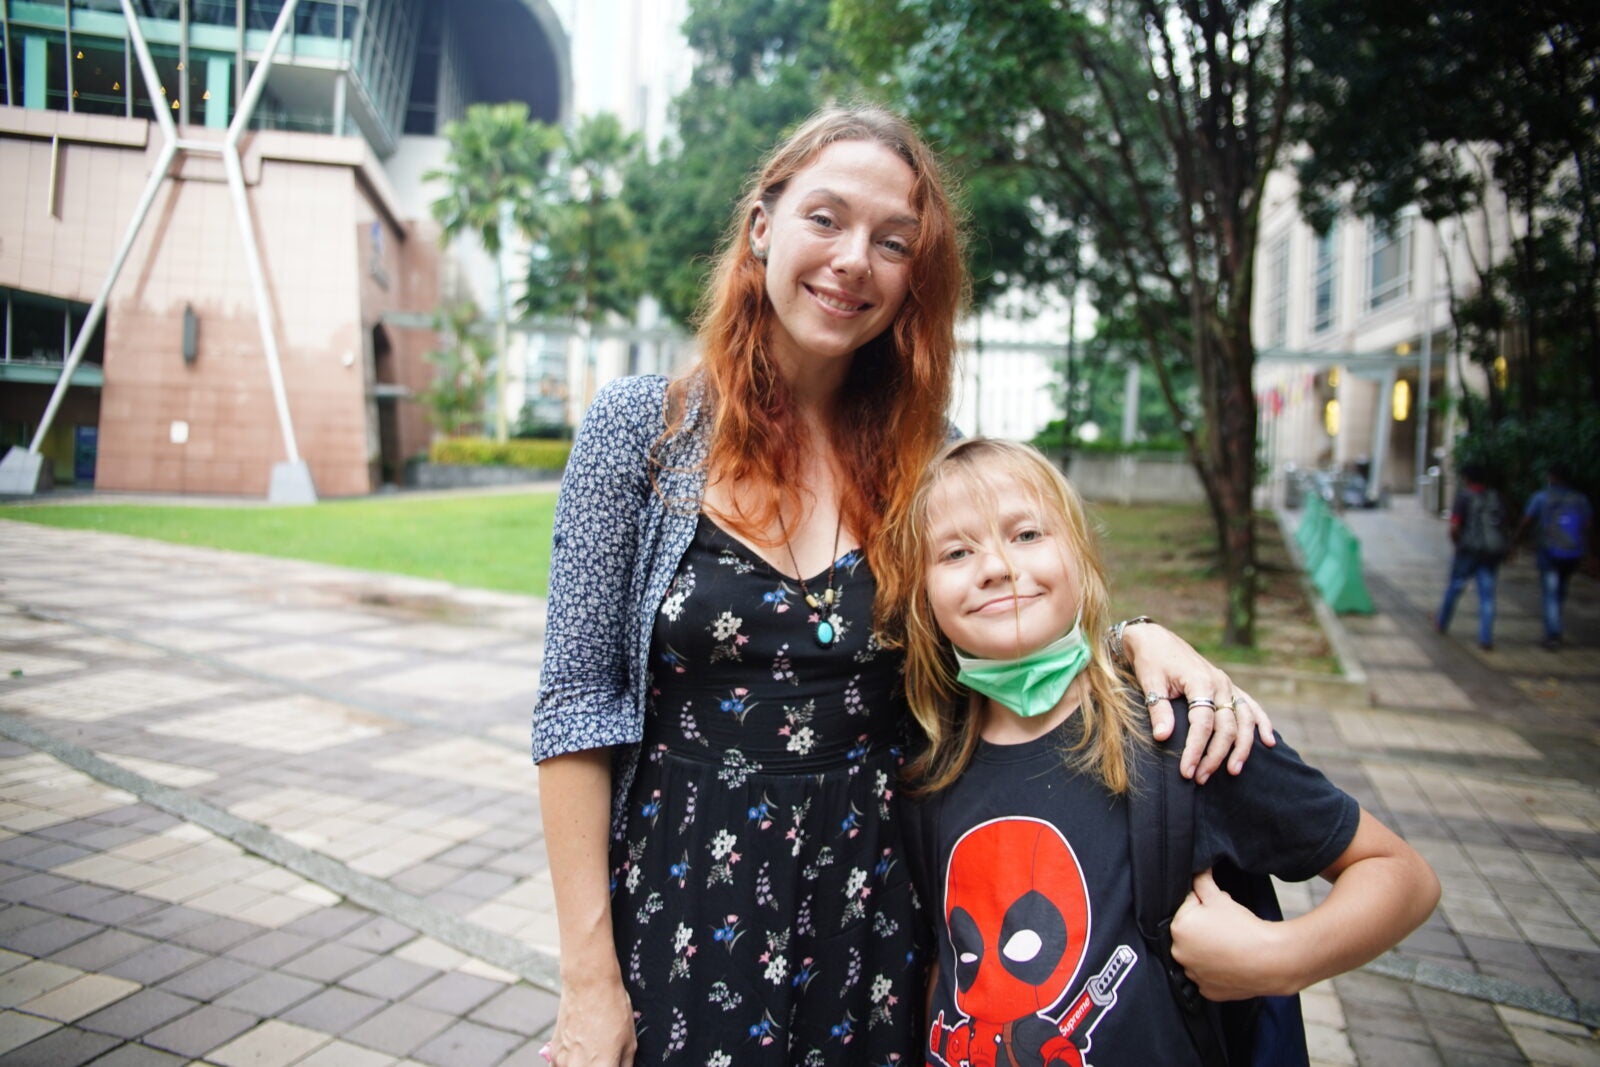 A ginger-haired Russian woman and her blonde son stand posing and smiling at a park